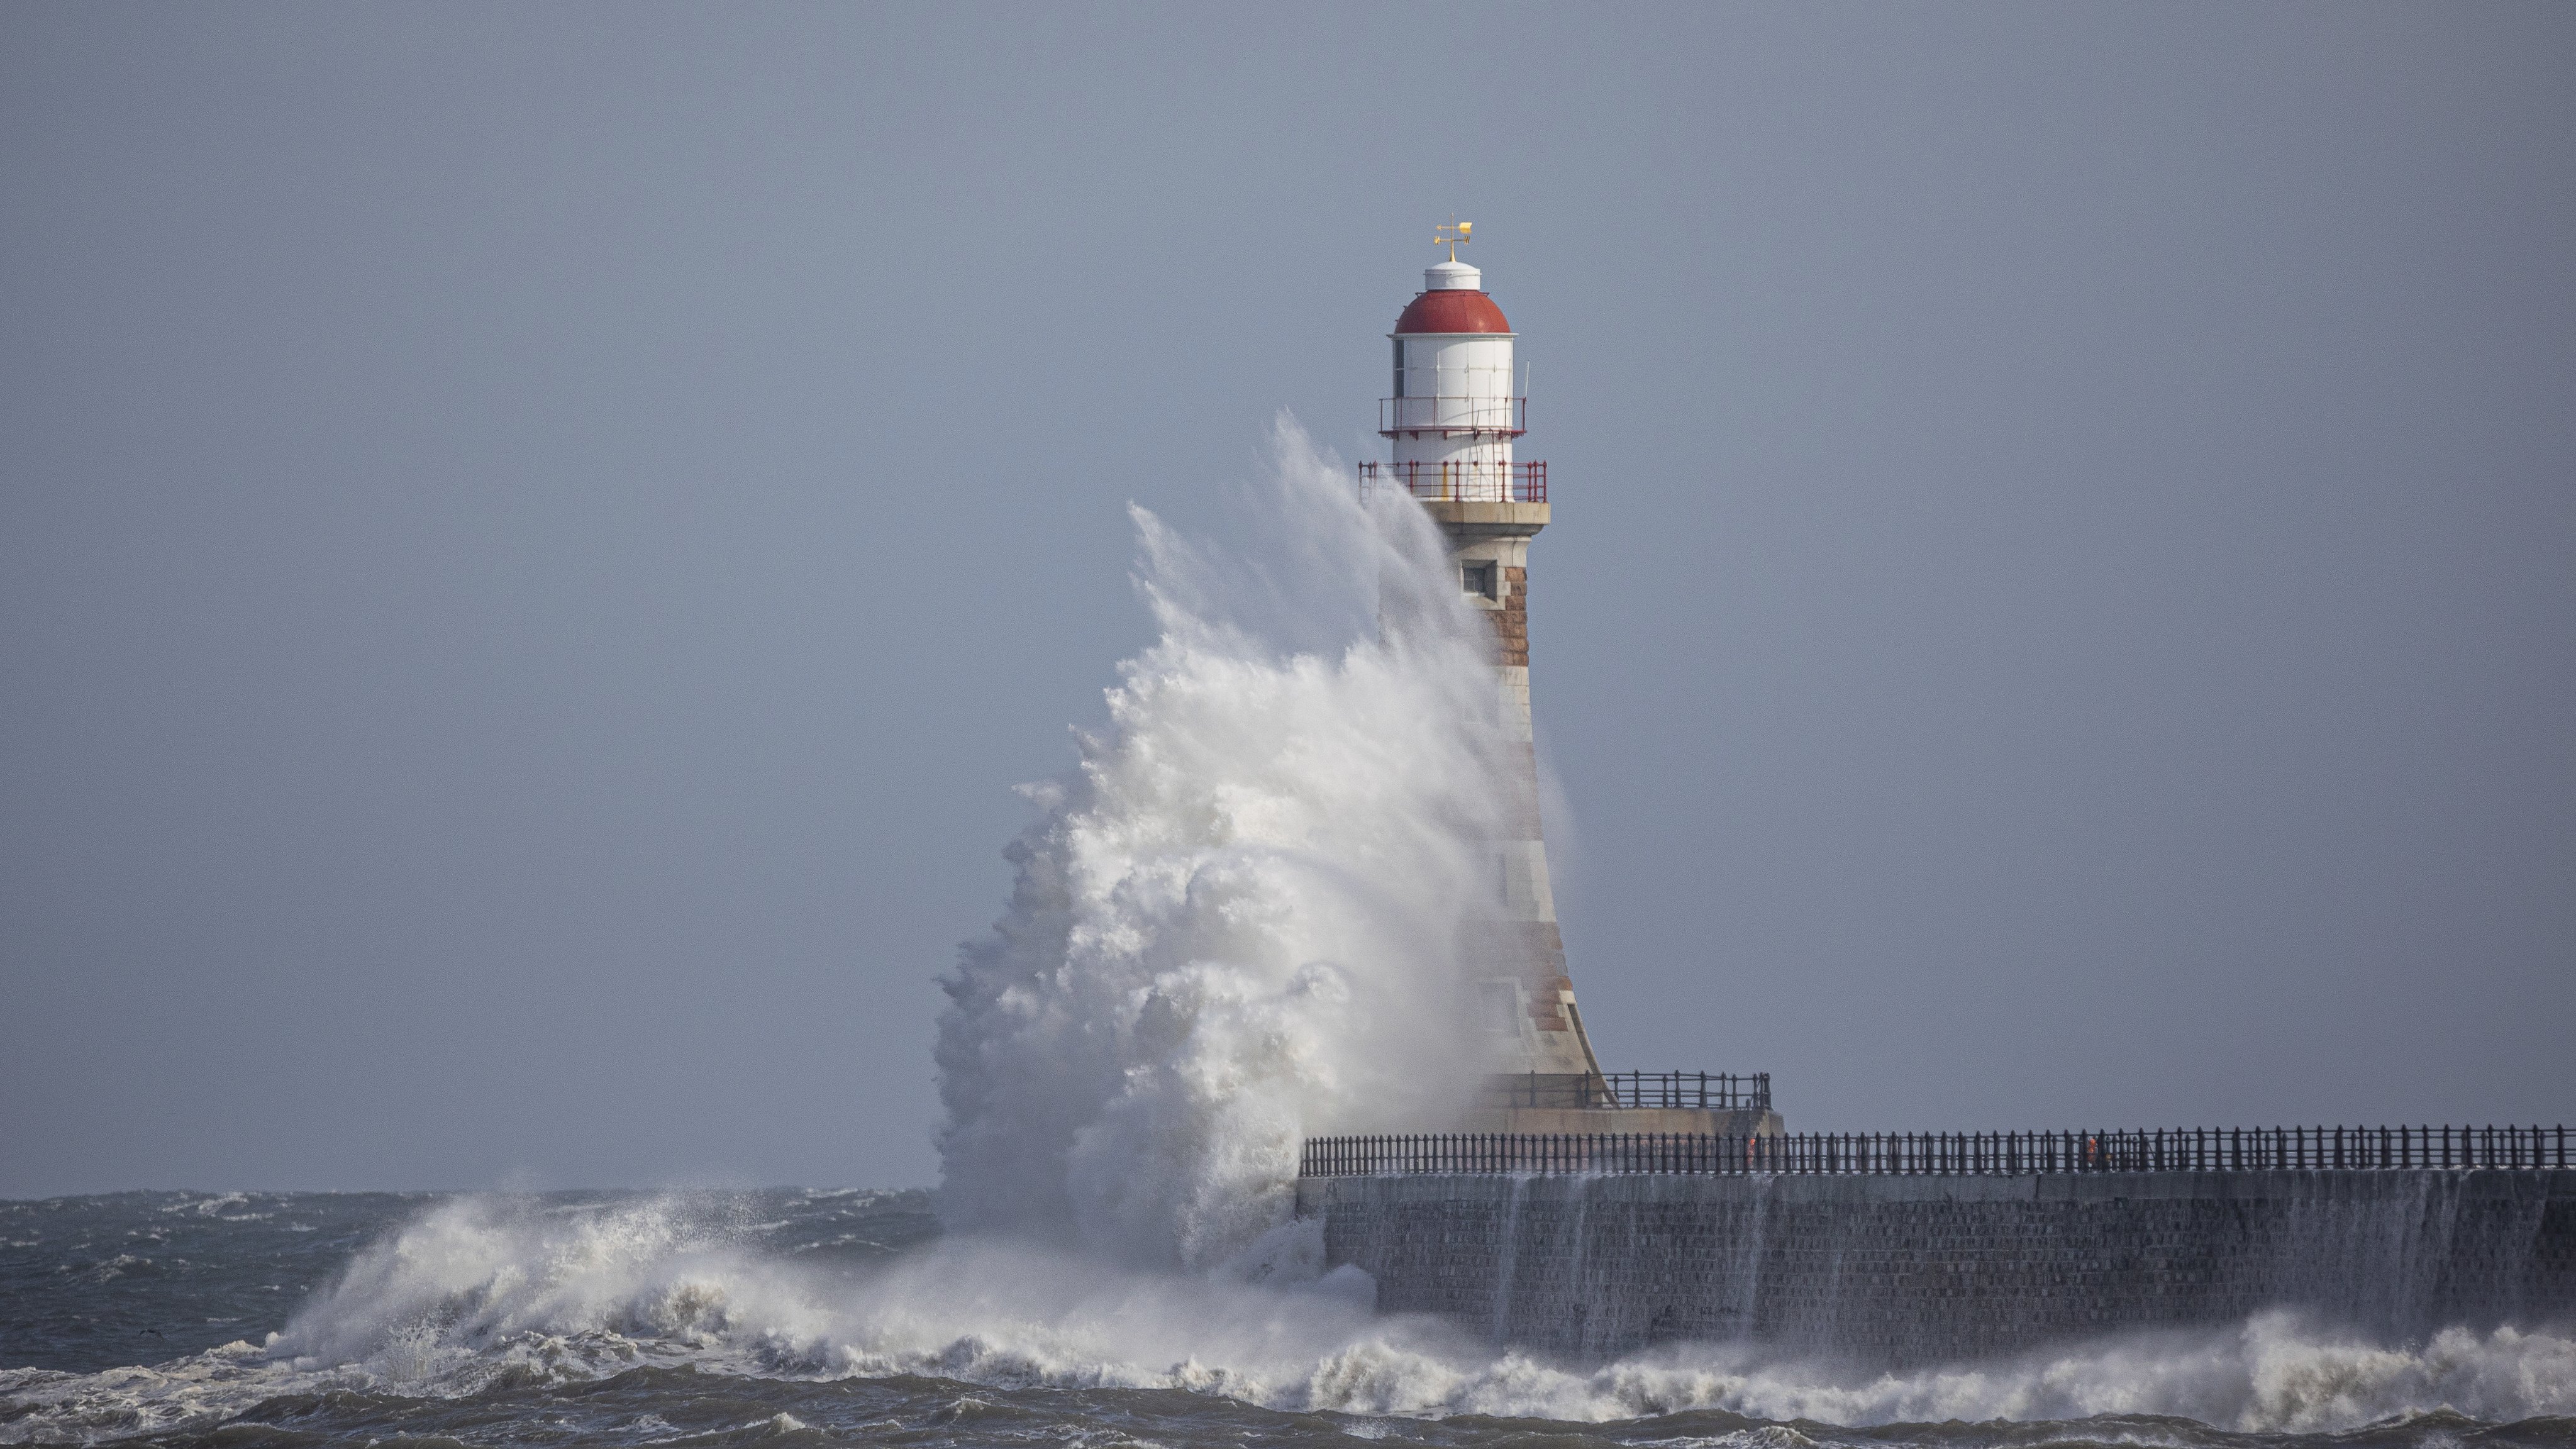 1st Place A beautiful wave hits Roker Lighthouse by simon c woodley @simoncwoodley